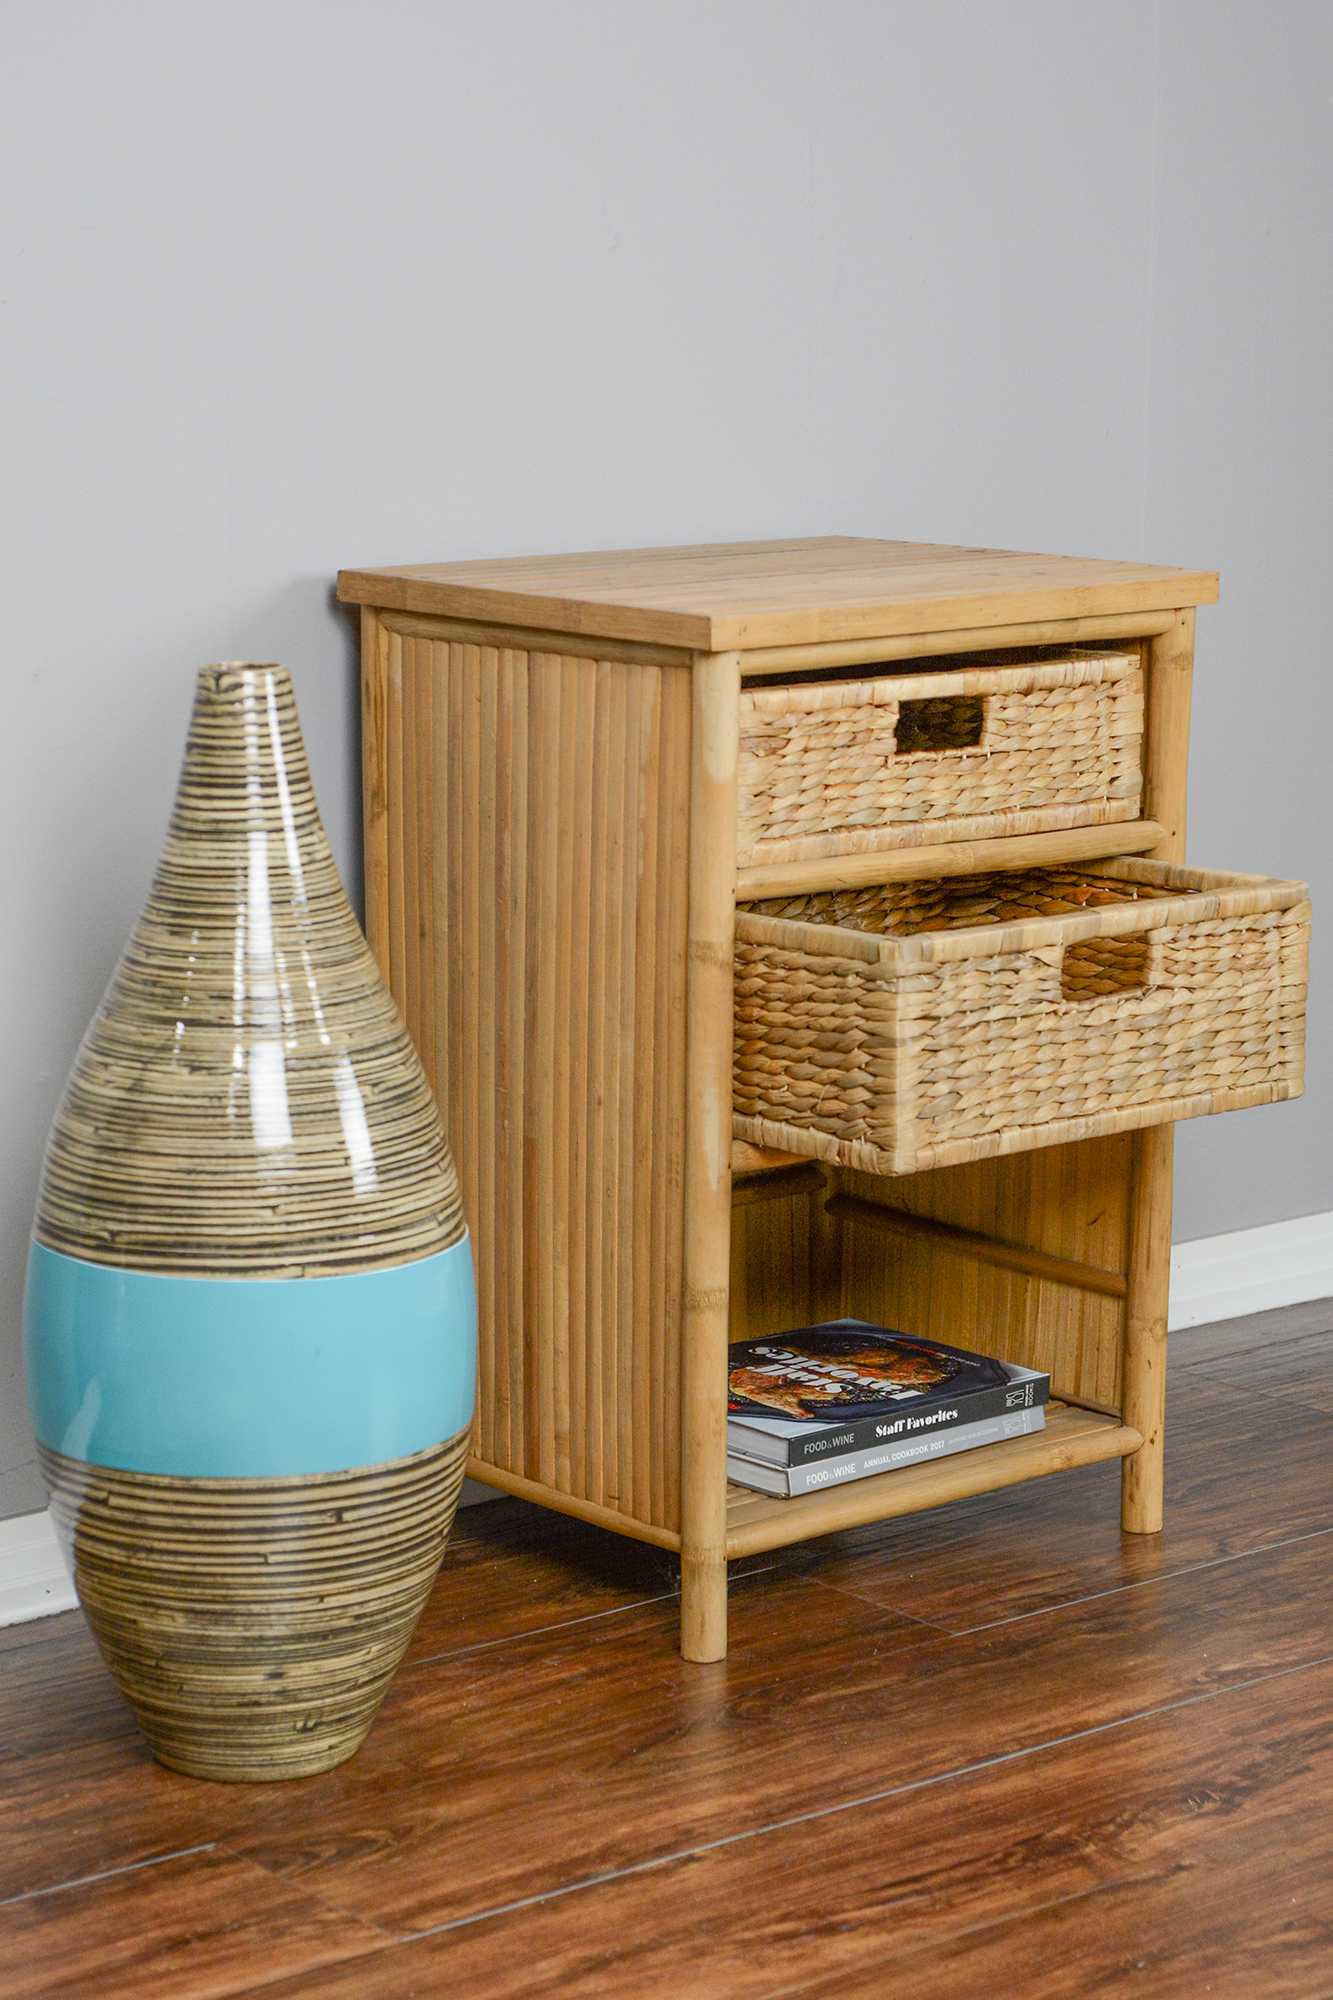 19" X 15.75" X 23.75" Natural Bamboo End Table with Baskets and a Shelf